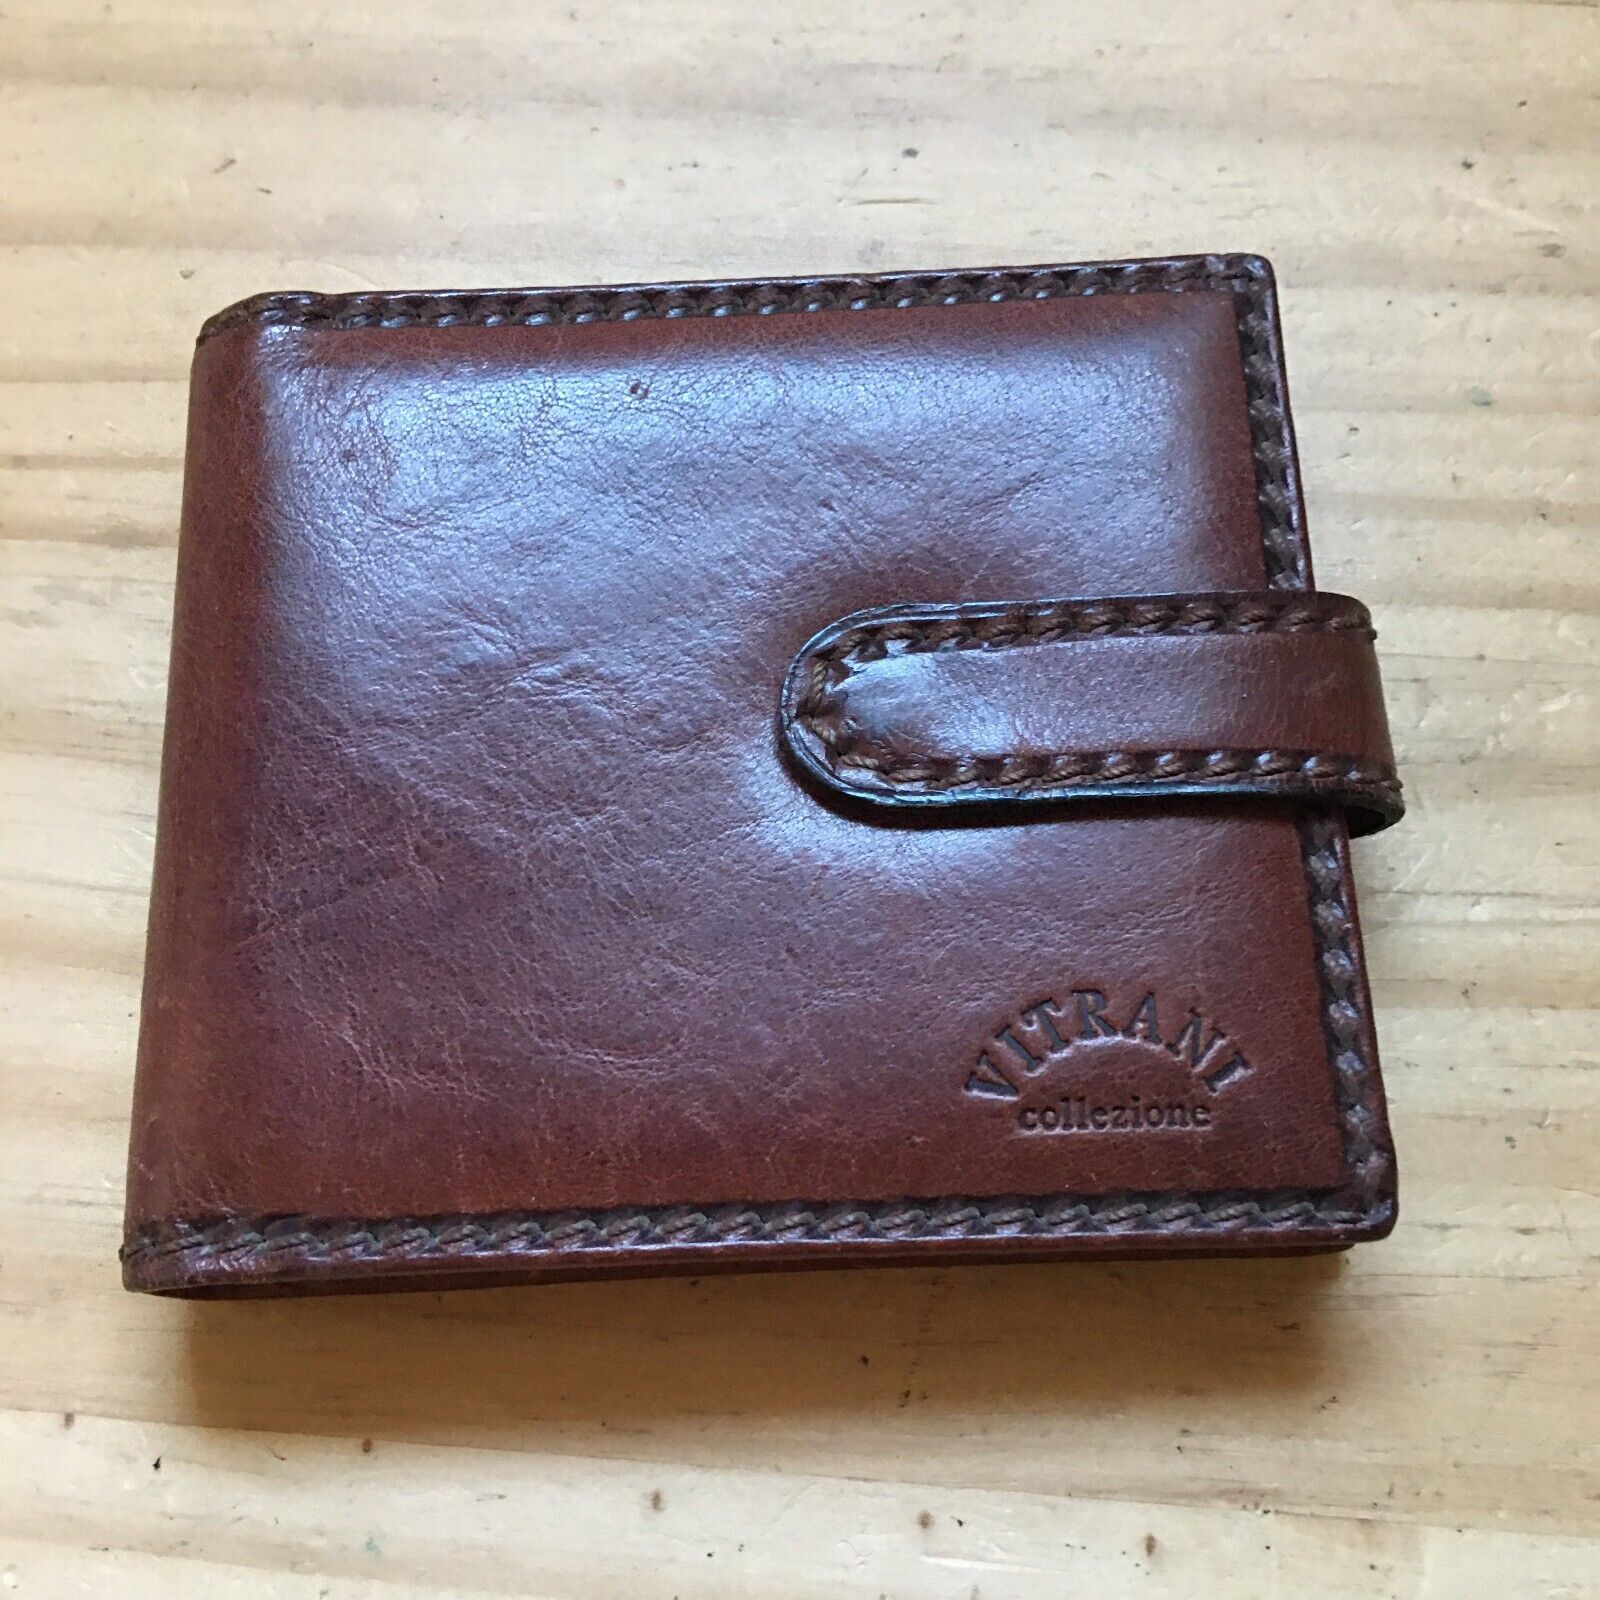 Vintage 1995 VITRANI Collezione Brown Leather Wallet Size Personal Notes Italian